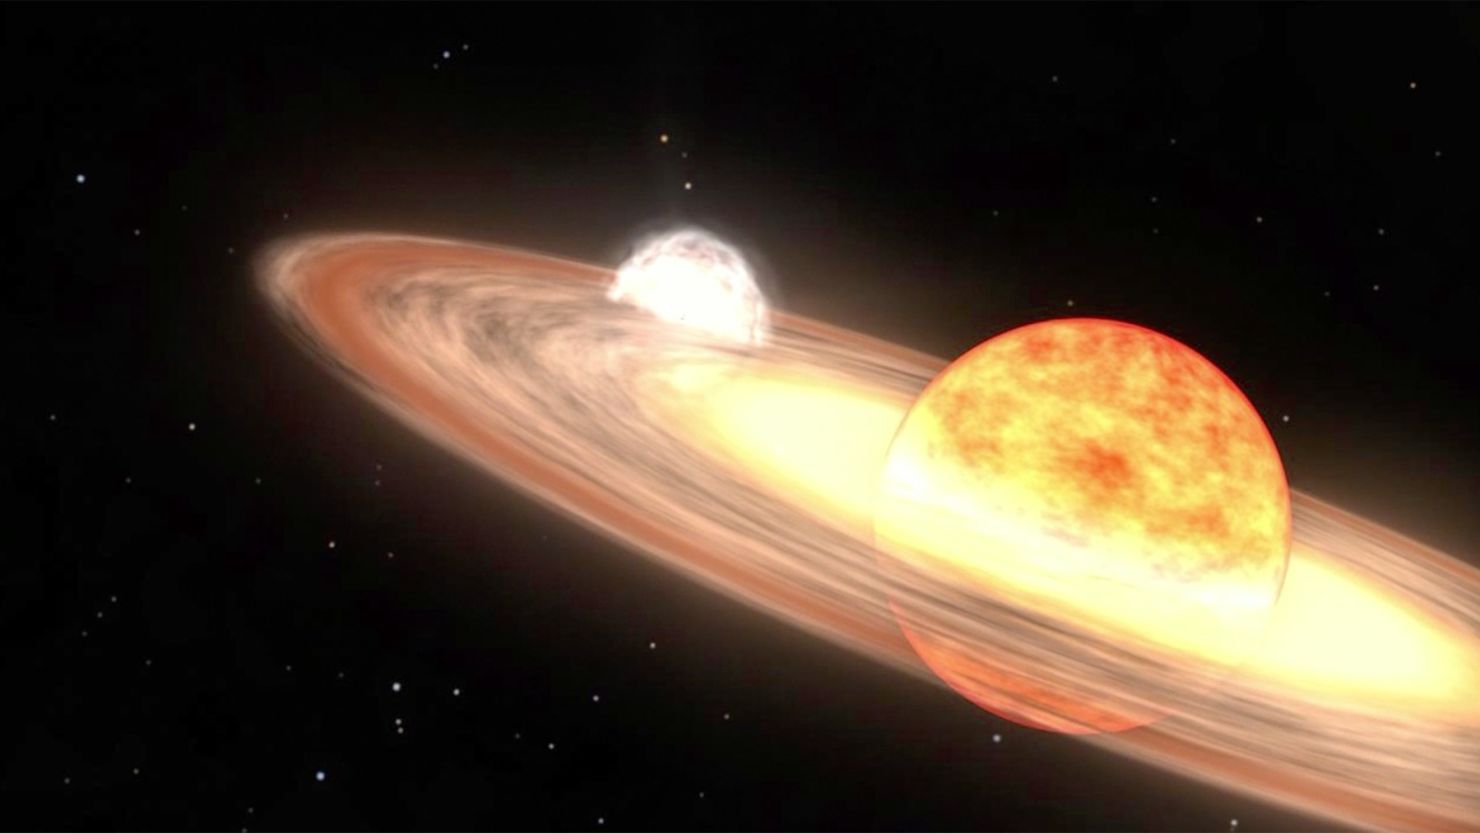 A red giant star and white dwarf orbit each other in NASA's illustration of a nova.